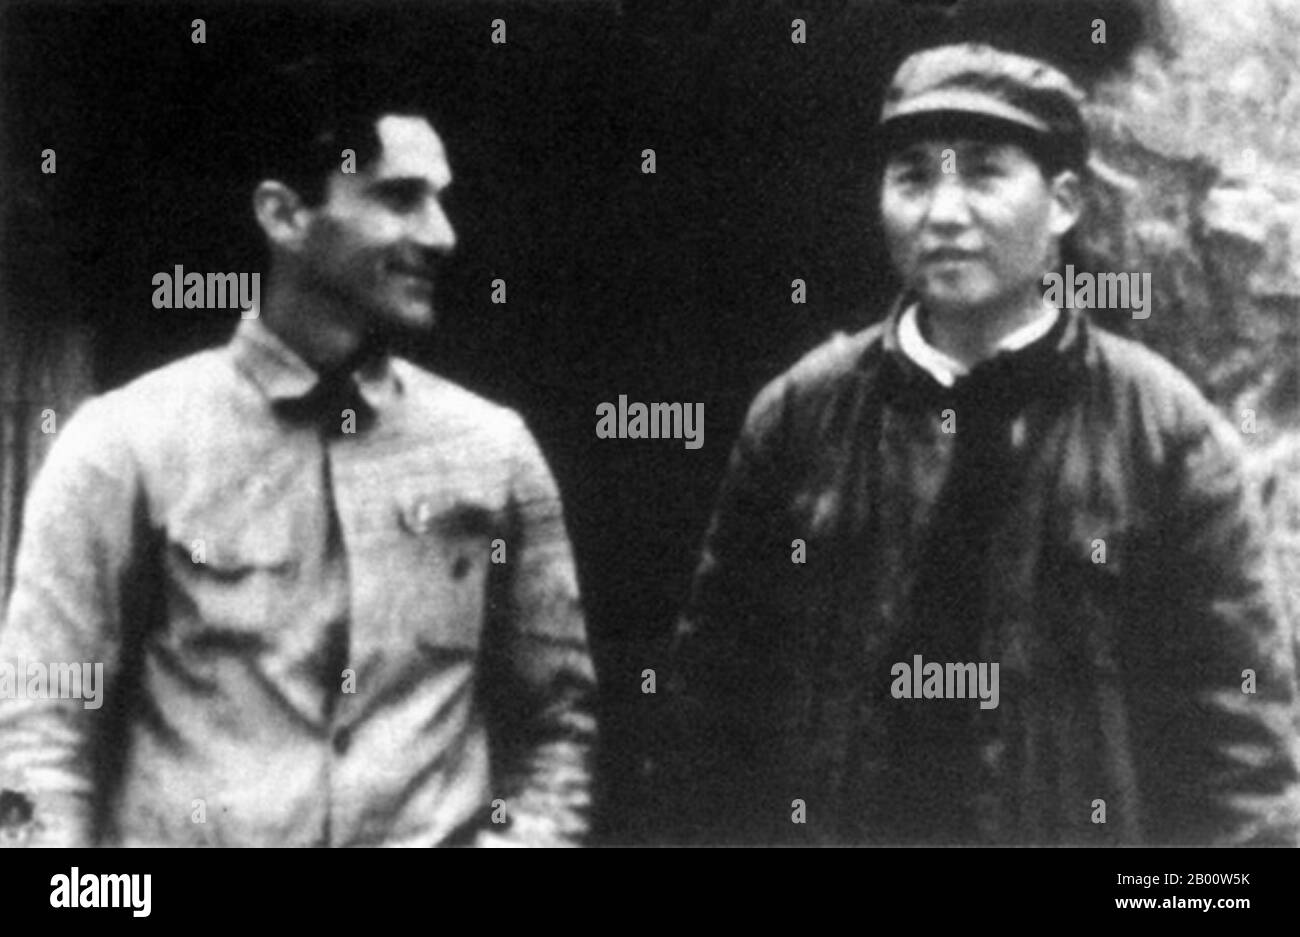 China: American journalist Edgar Snow with Mao Zedong in Yan'an, October 1936.  Edgar Snow (17 July 1905 in Kansas City, Missouri – 15 February 1972 in Geneva) was an American journalist known for his books and articles on Communism in China and the Chinese Communist revolution. He is believed to be the first Western journalist to interview Chinese Communist leader Mao Zedong, and is best known for Red Star Over China (1937) an account of the Chinese Communist movement from its foundation until the late 1930s. Stock Photo